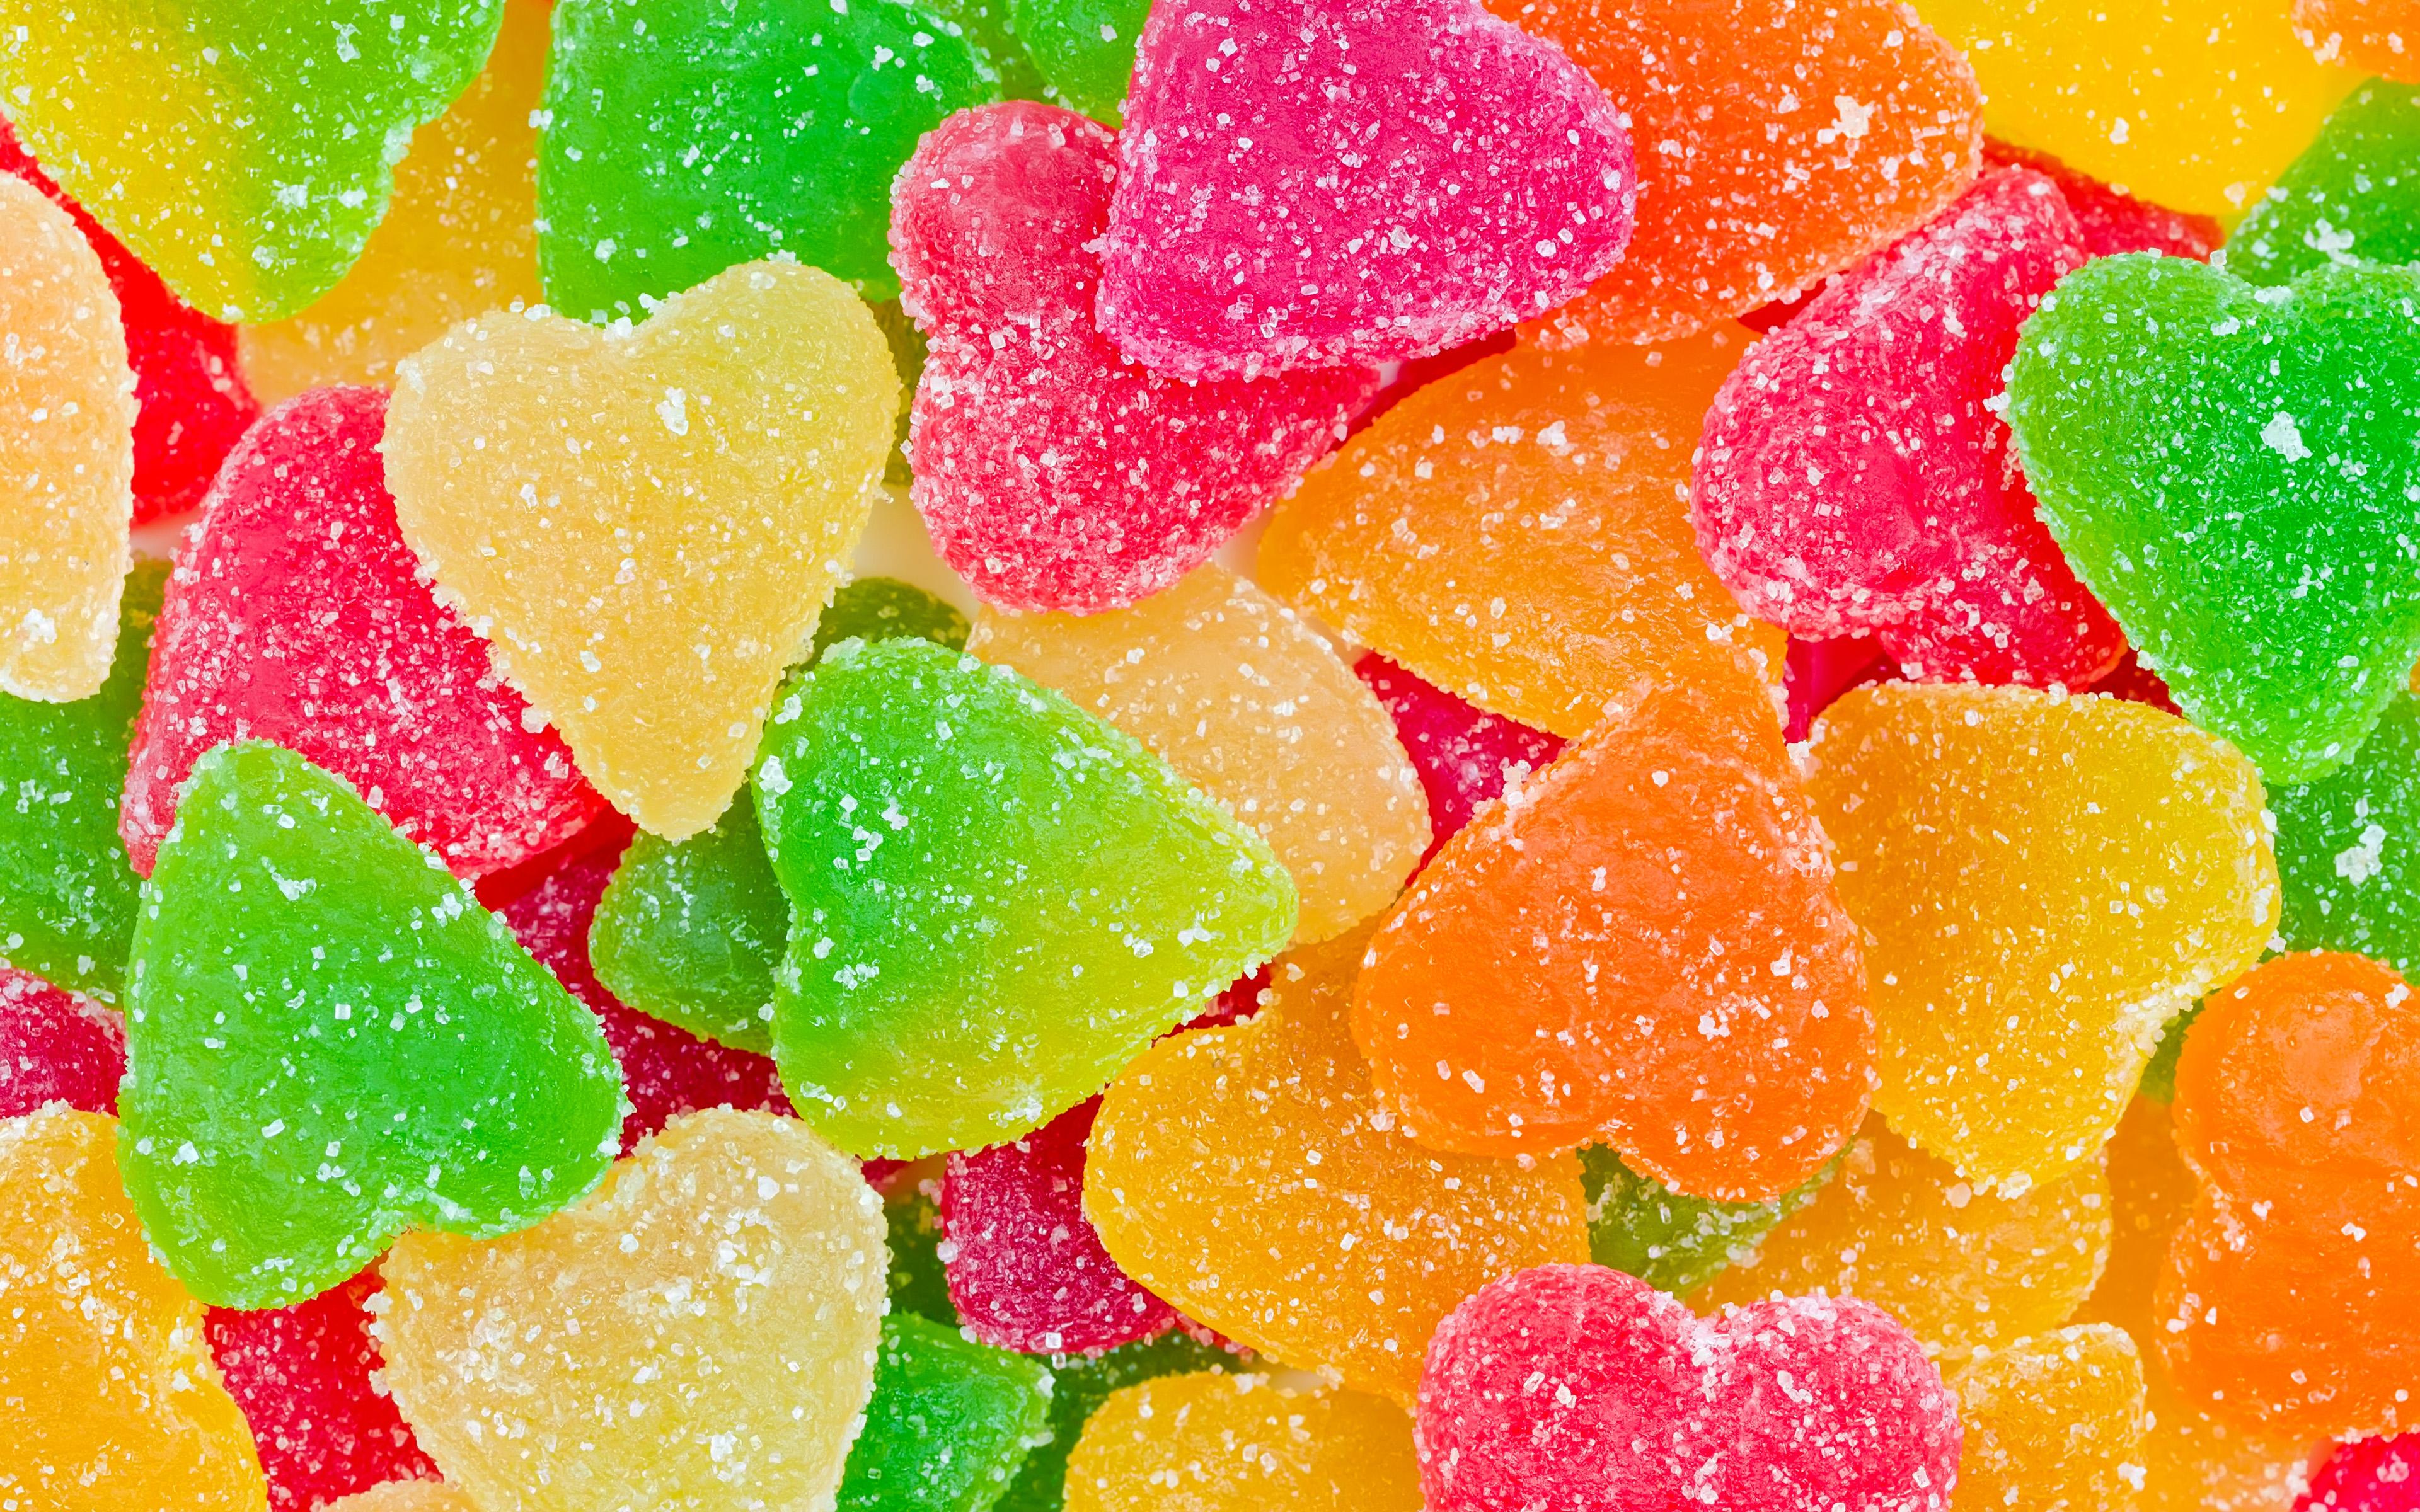 Sweet Candy Hd Wallpapers - Wallpaper Cave 221